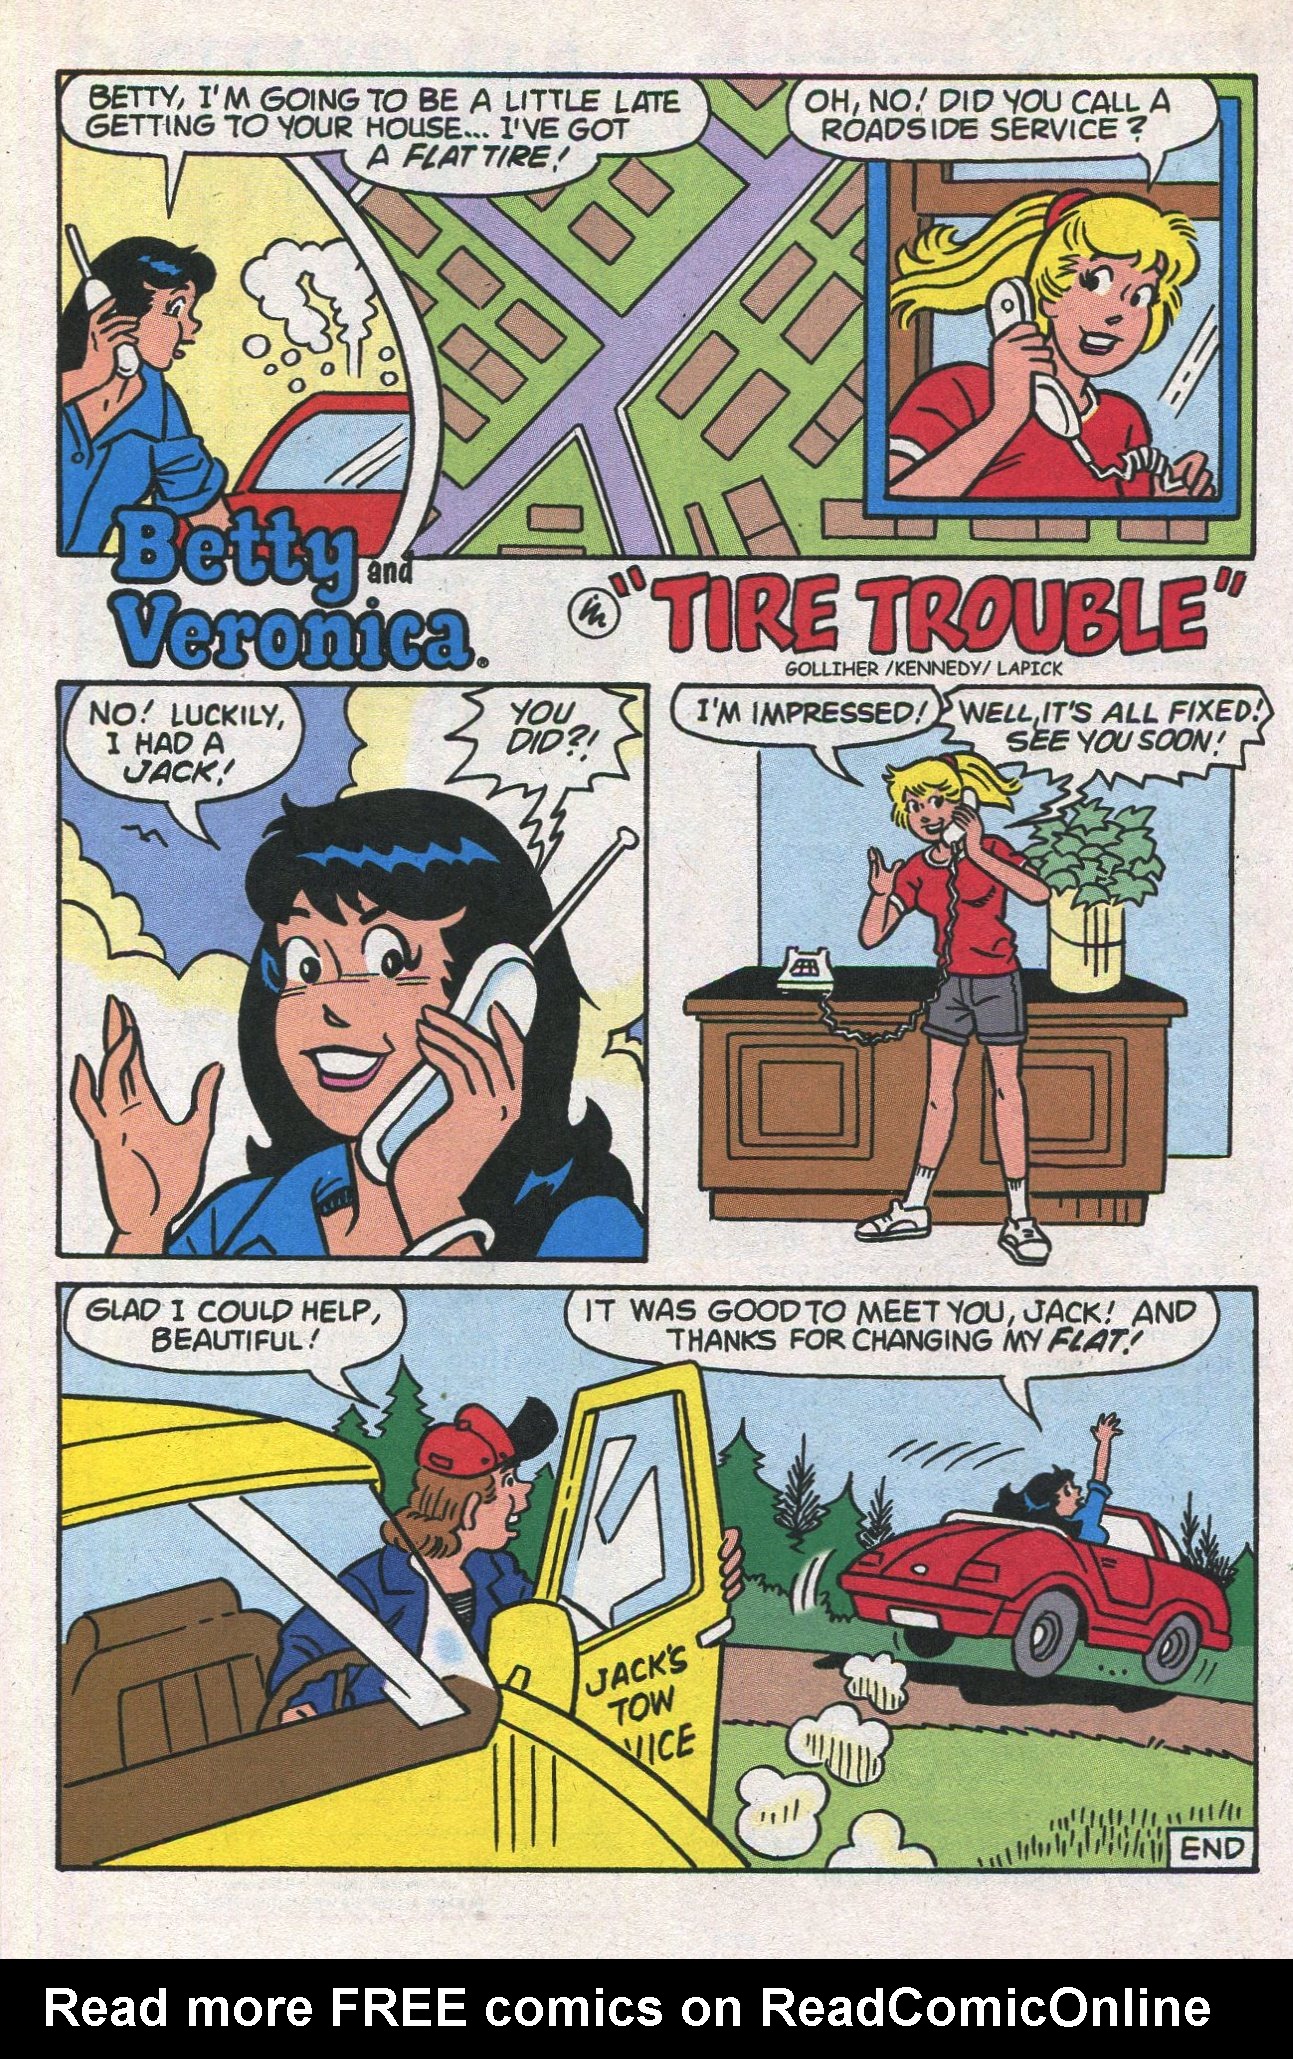 Read online Betty comic -  Issue #102 - 18